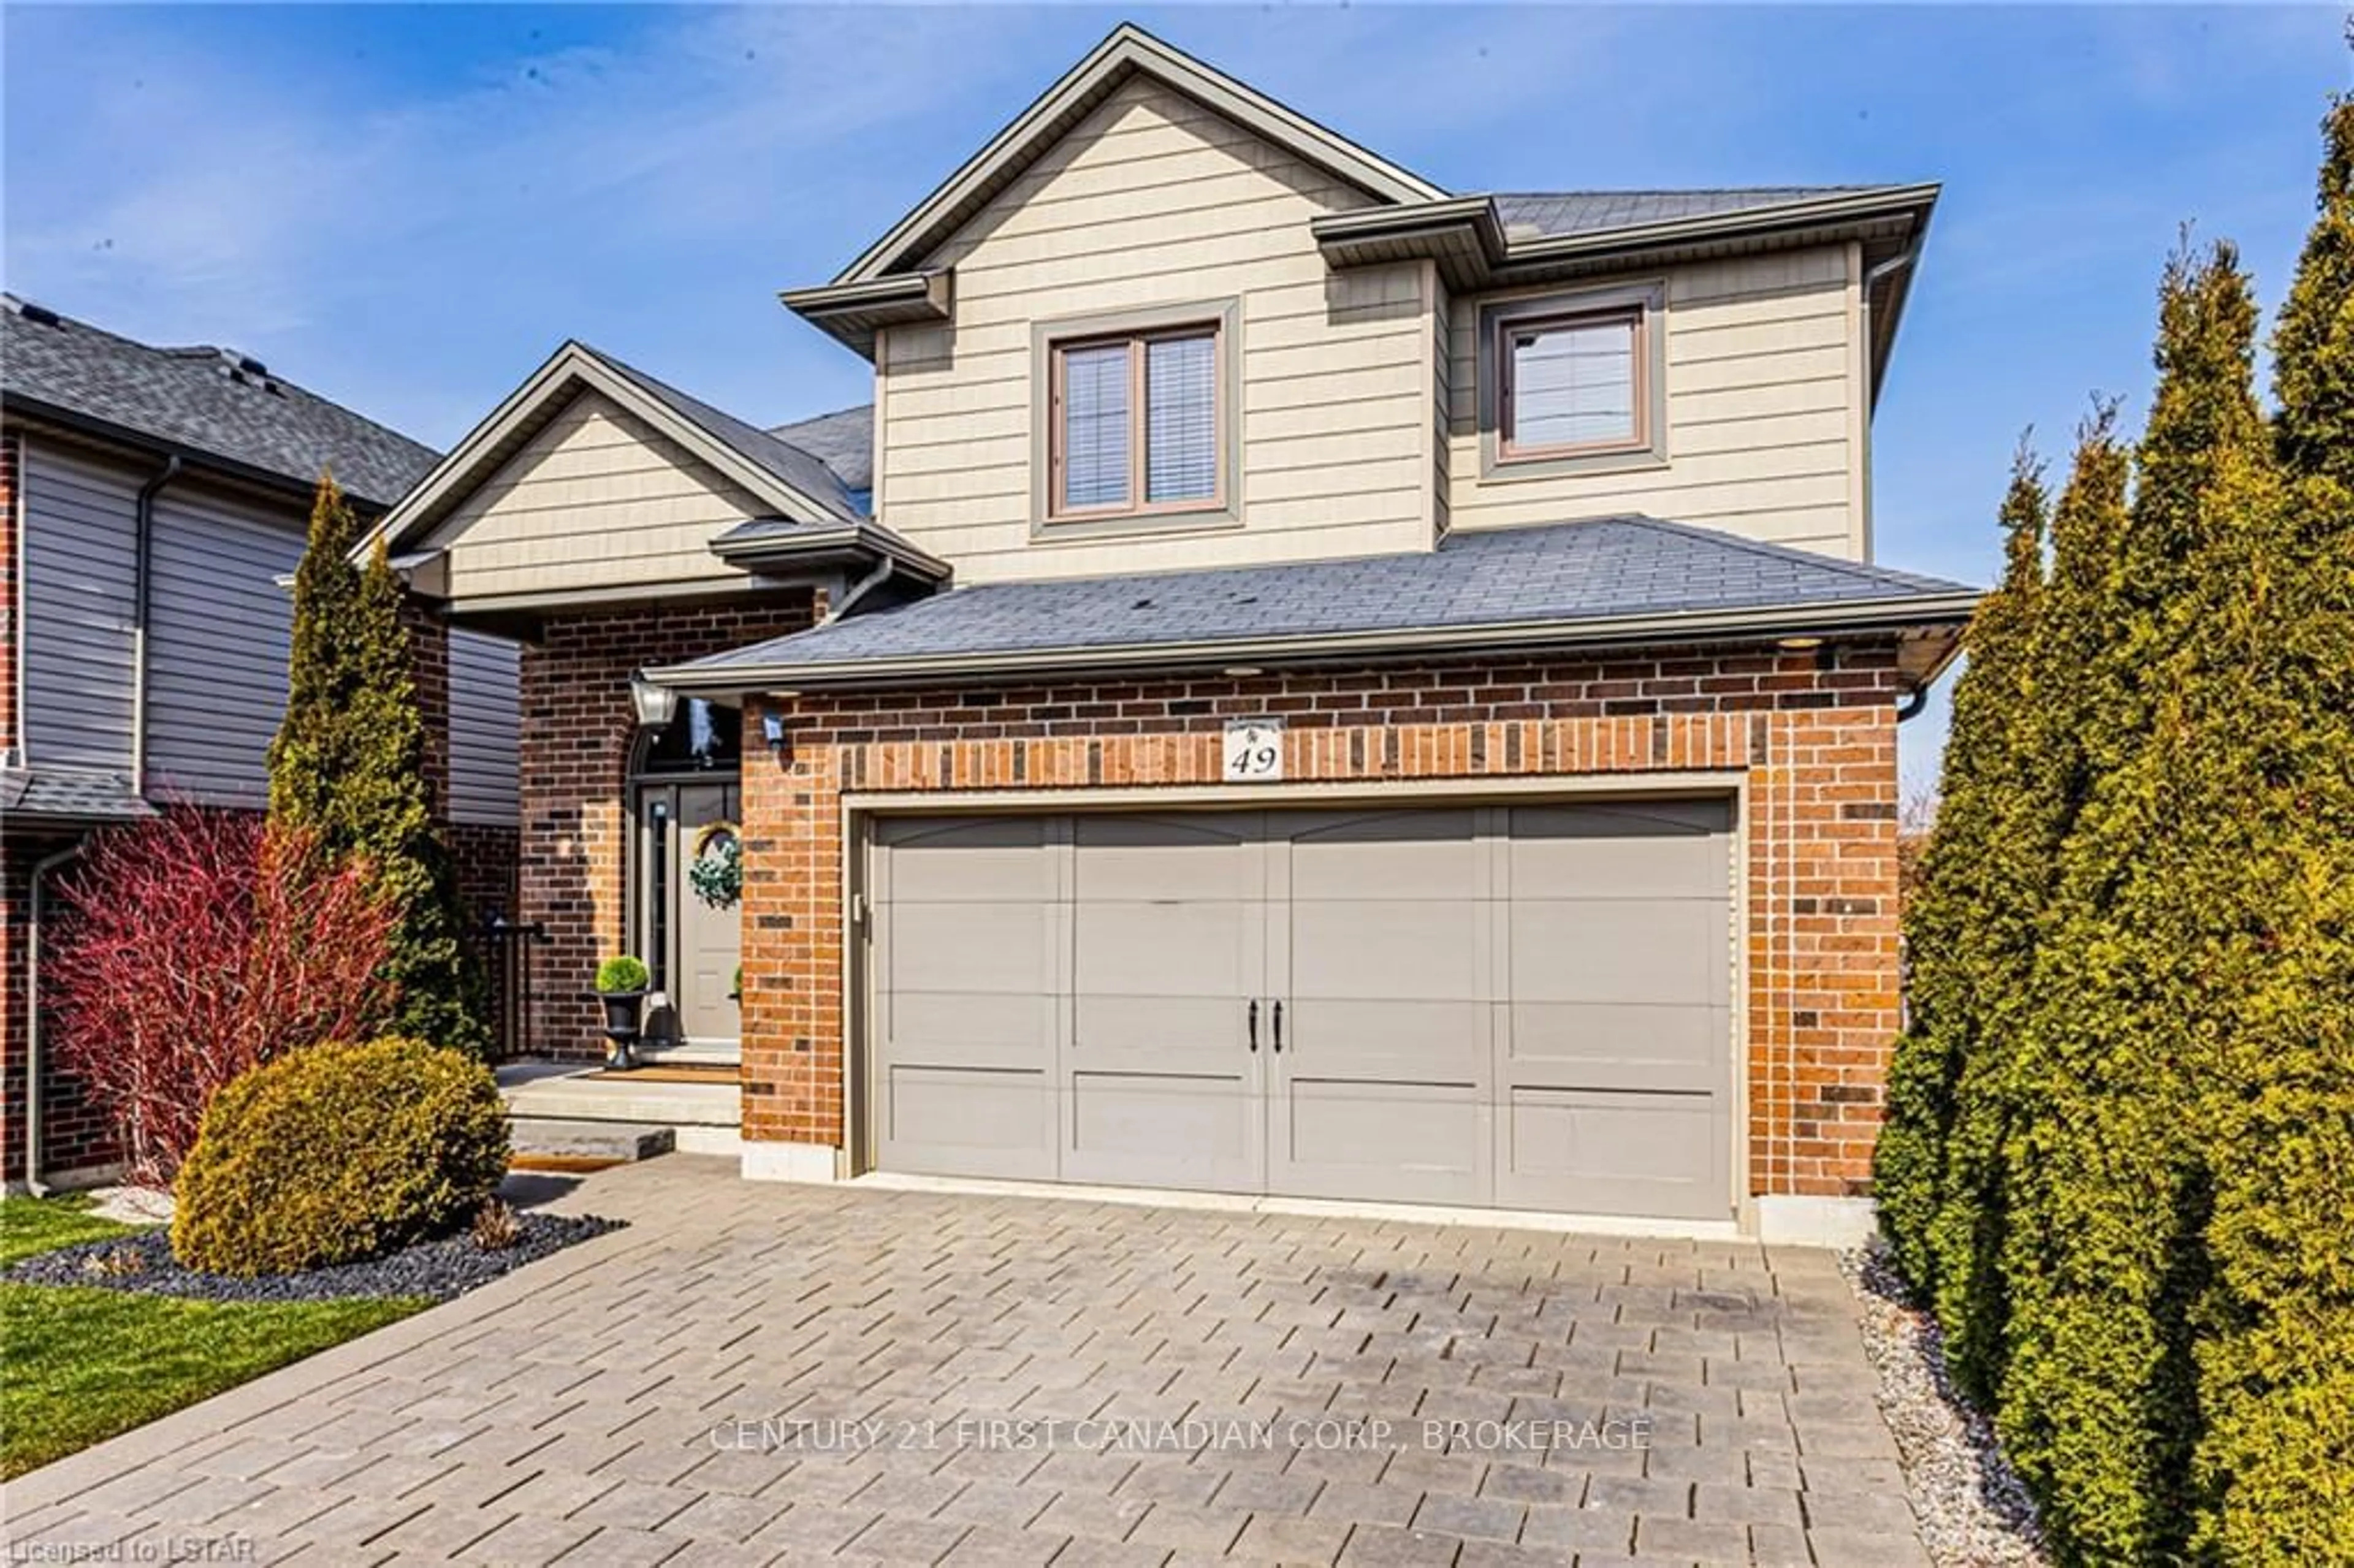 Home with brick exterior material for 70 Tanoak Dr #49, London Ontario N6G 5R3